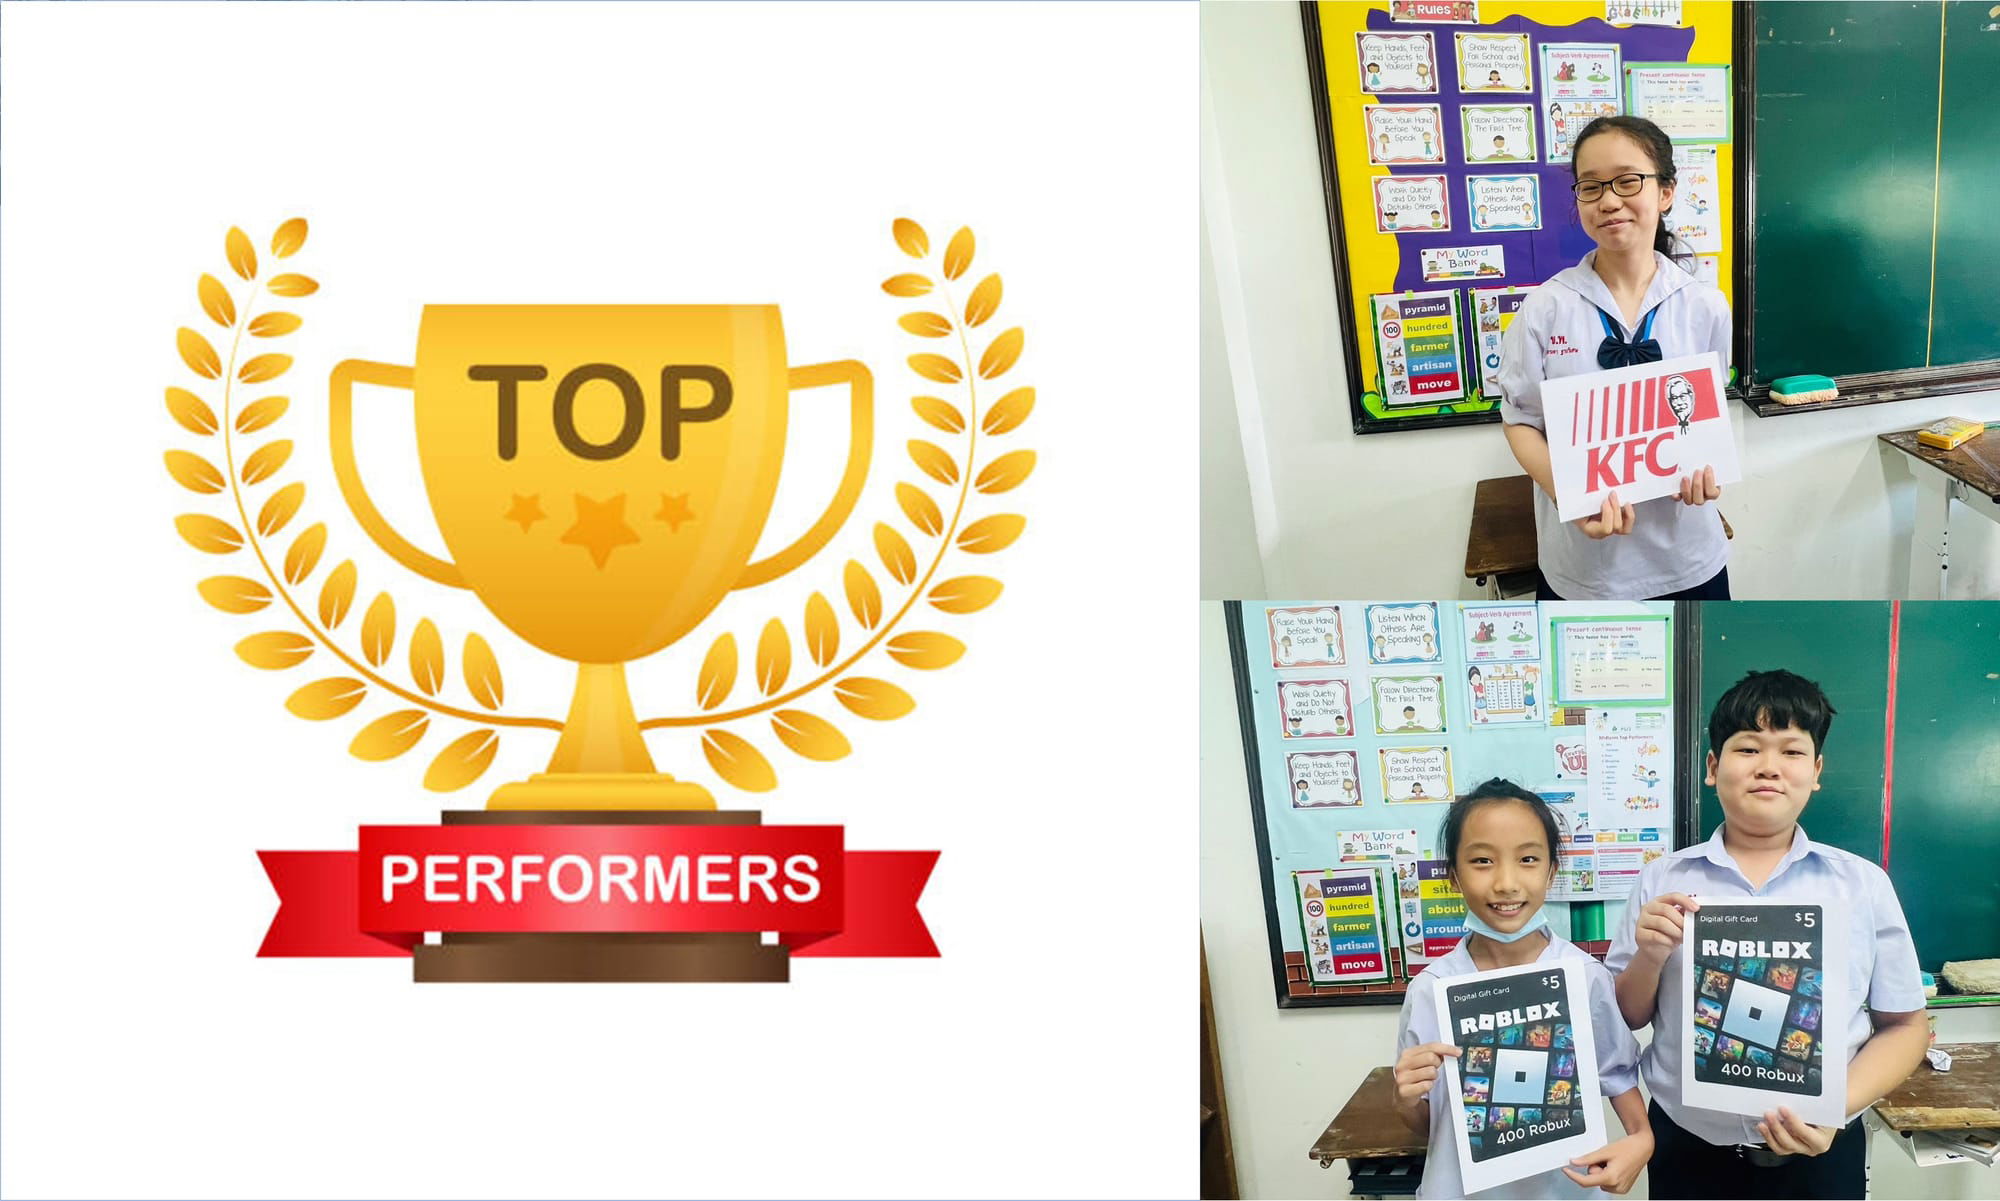 TERM 2 MIDTERM ASSESSMENT TOP PERFORMERS